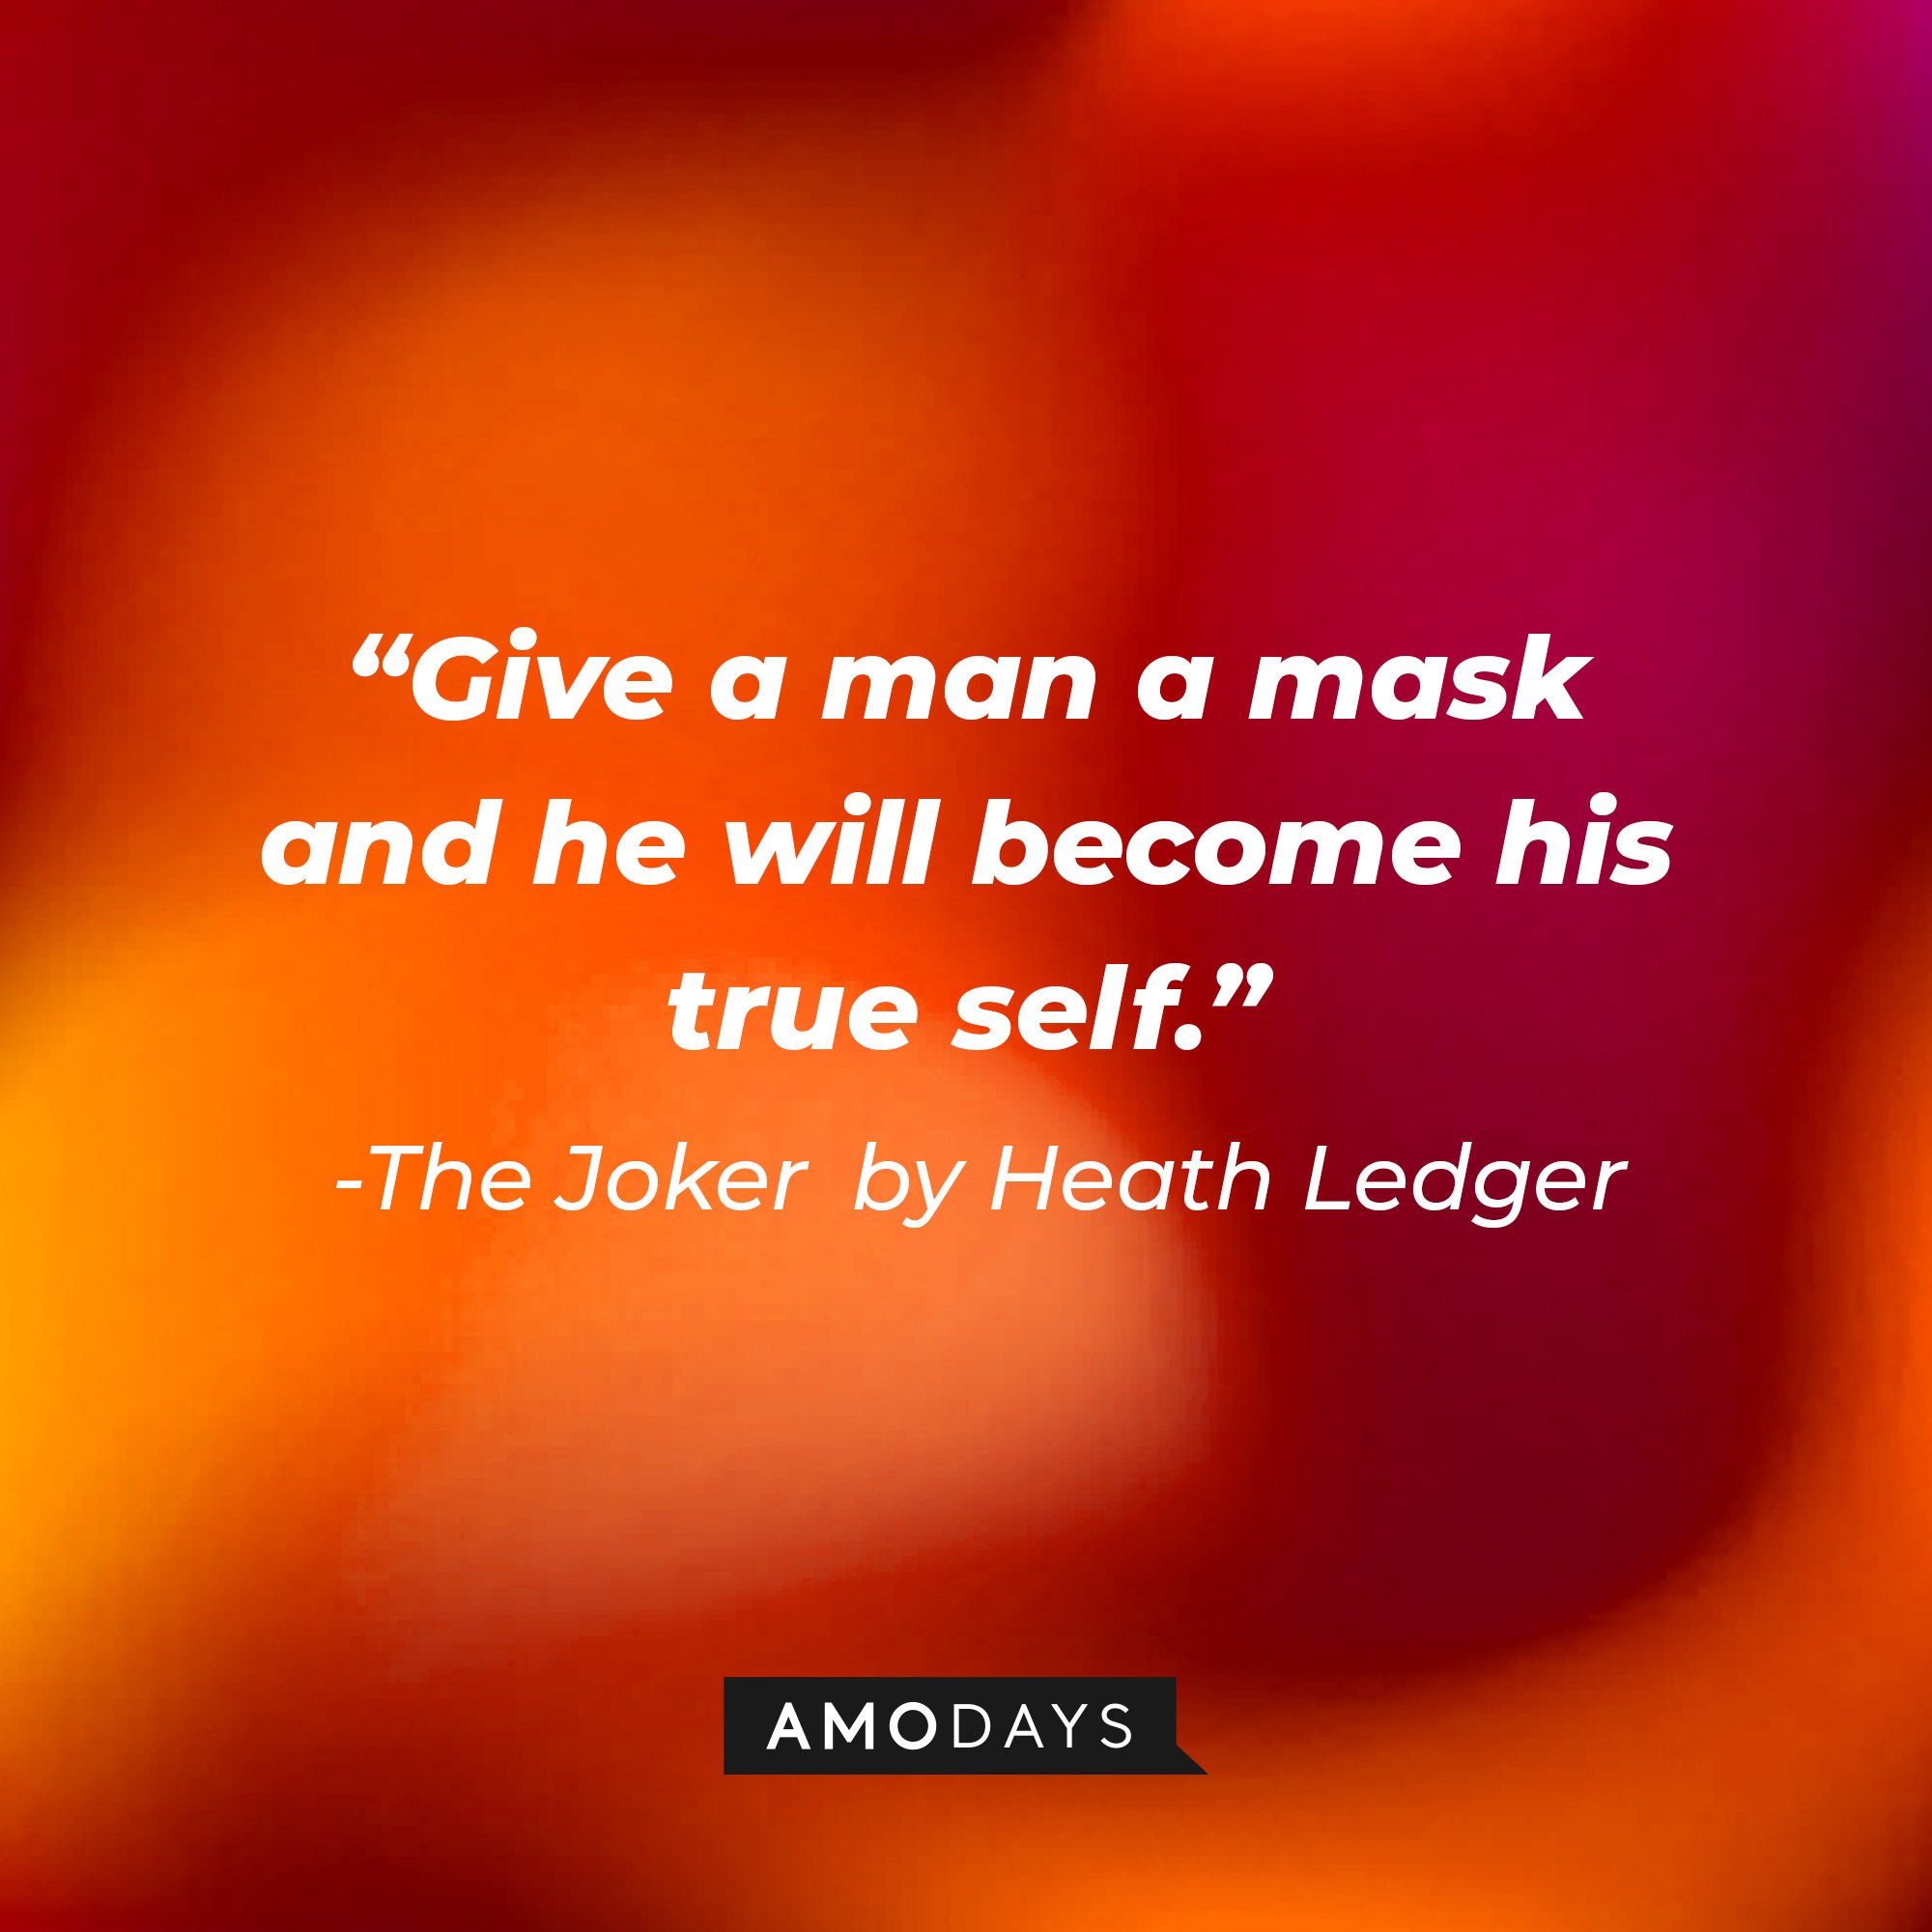 The Joker in Christopher Nolan’s “The Dark Night” quote: “Give a man a mask and he will become his true self.” | Image: Amodays